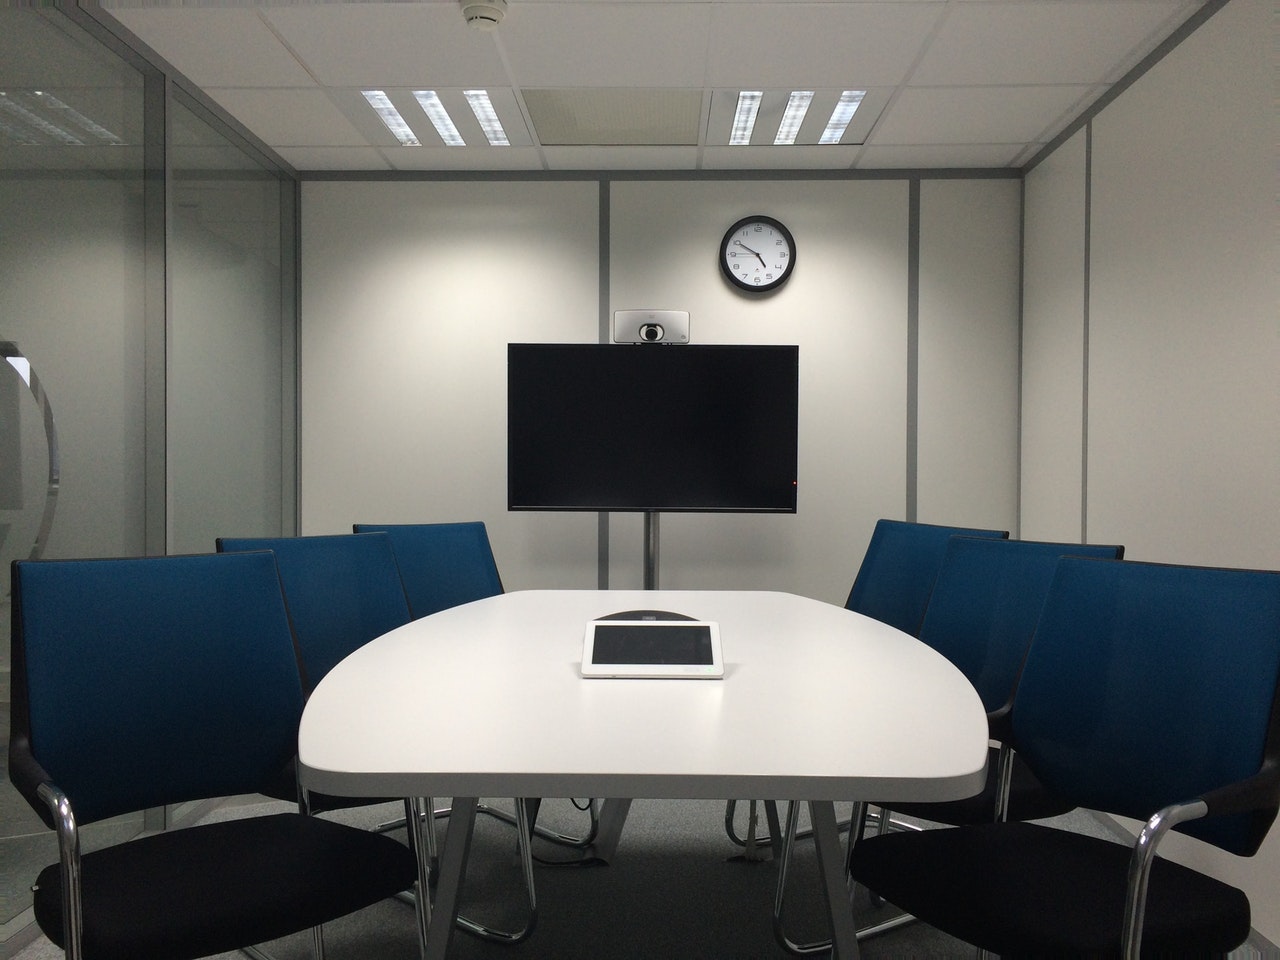 A room set up with video conference technology